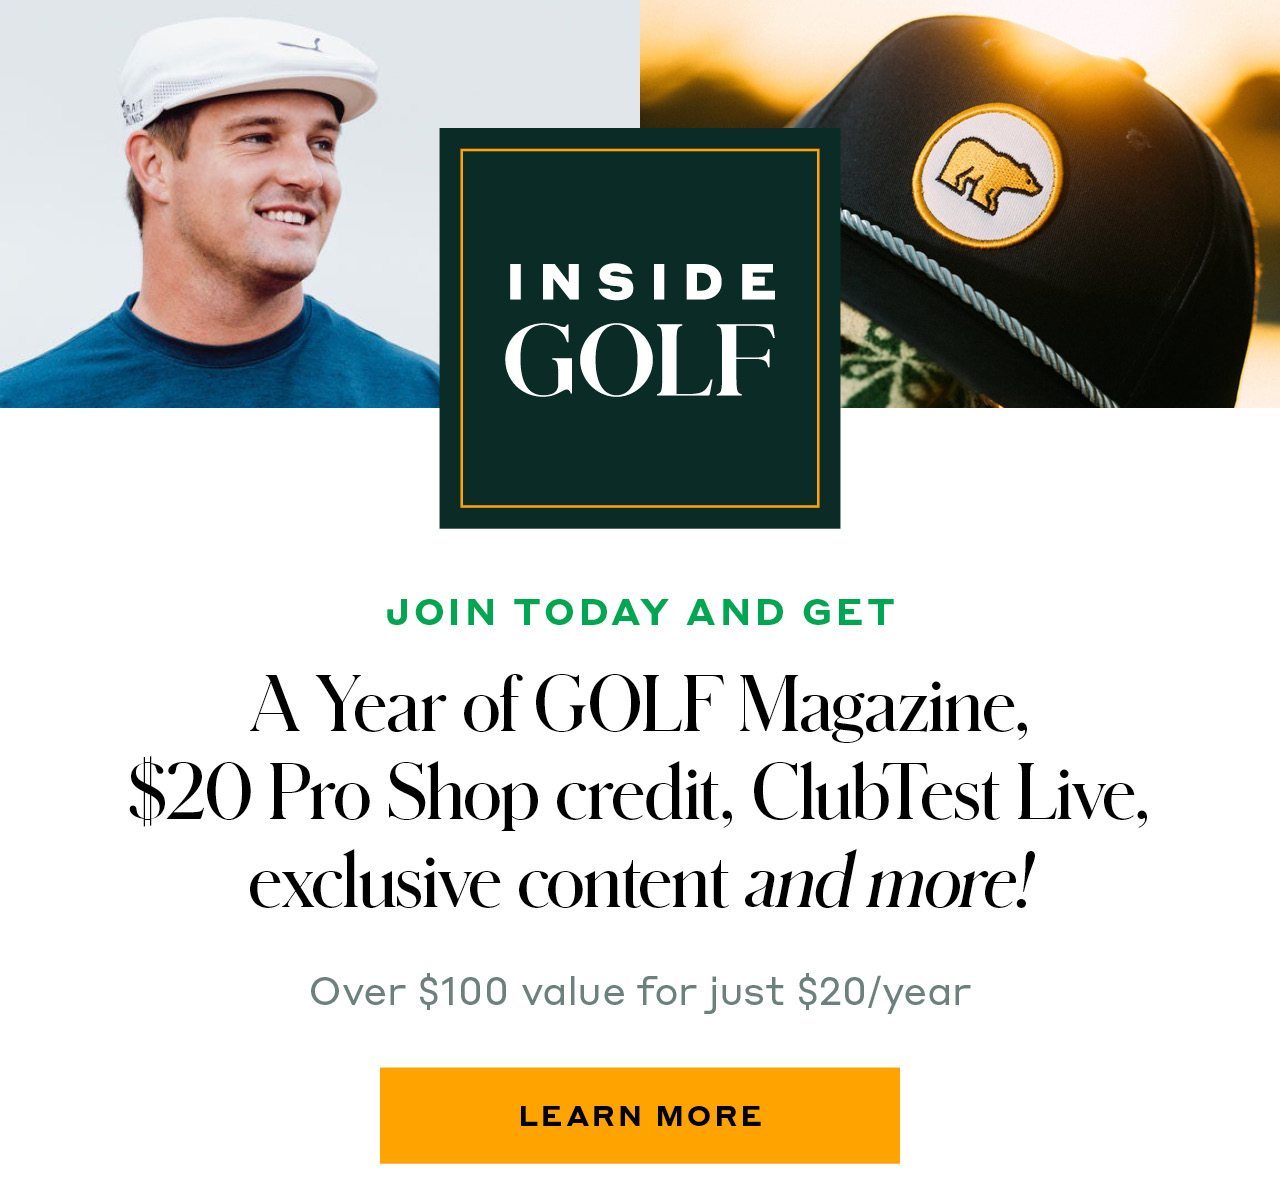 Join today and get a year of GOLF Magazine, $20 Pro Shop credit, exclusive content, and more! Over $100 value for just $20/year. LEARN MORE.